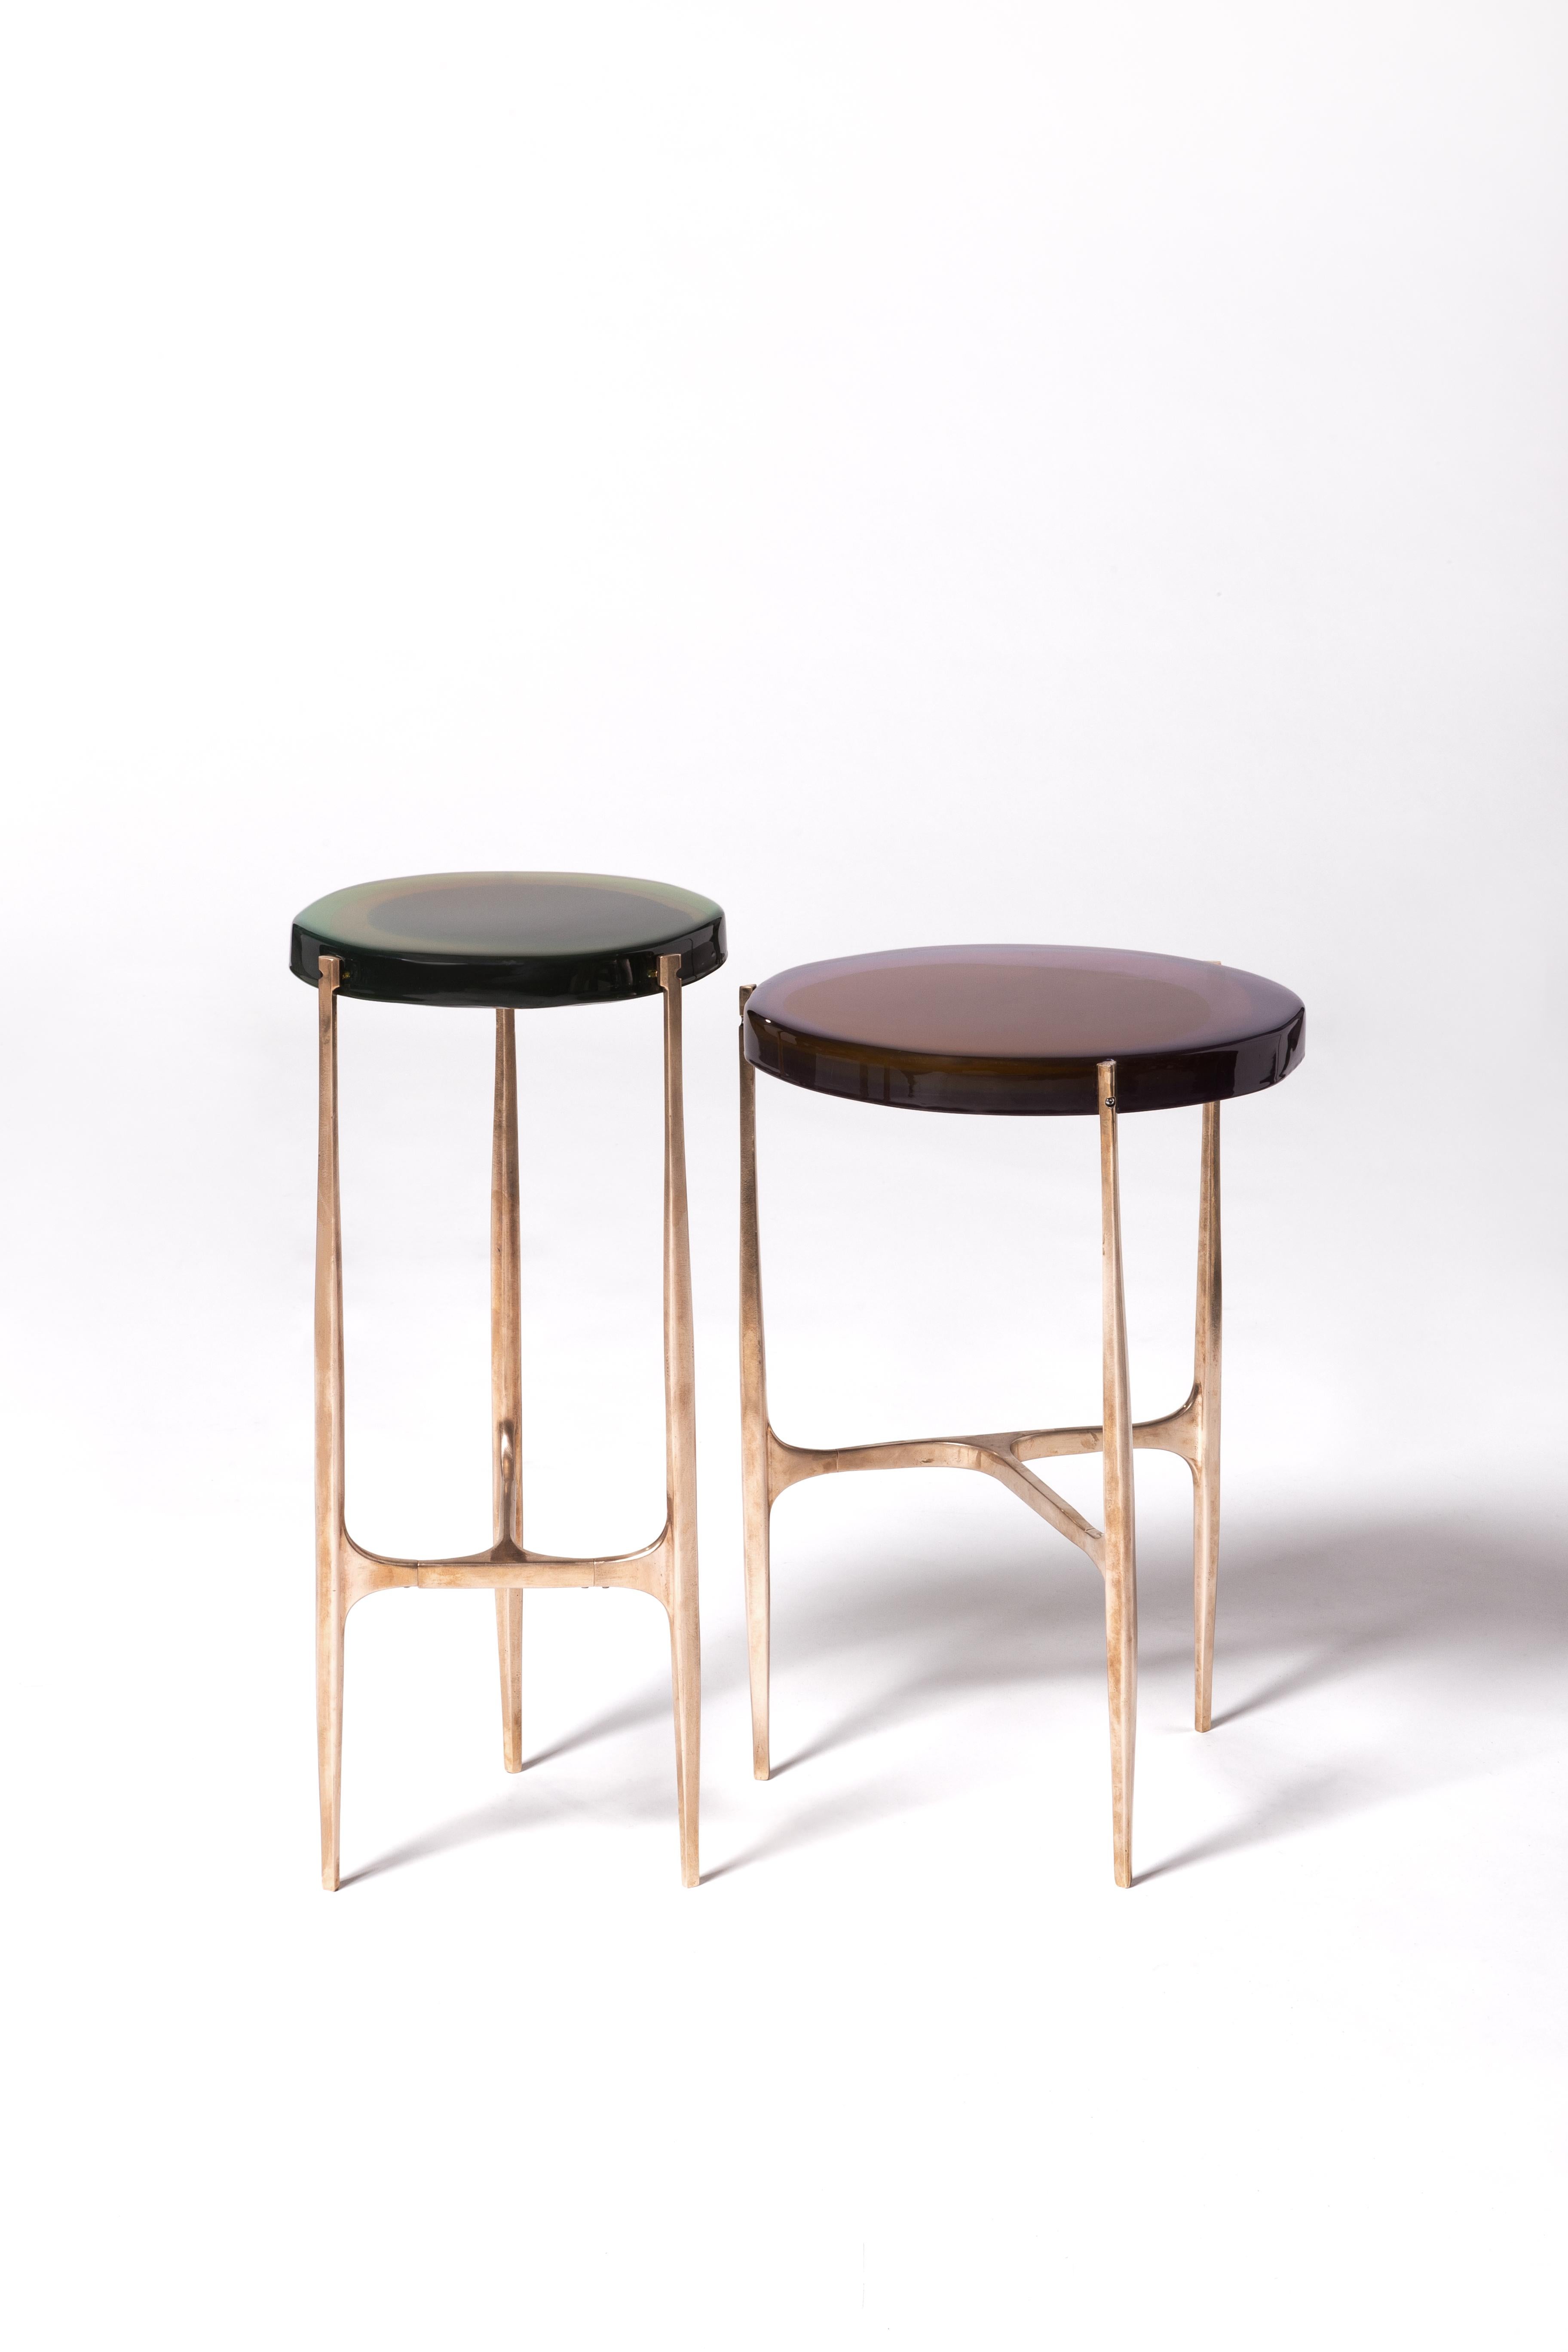 Set of 2 Agatha coffee table by Draga & Aurel
Dimensions: W 24 x D 24 x H 56, W 34 x D 34 x H 50
 top Ø 34 cm
Materials: Resin, bronze

The Agatha coffee tables are featured by irregular circular tops of transparent and
colorful resin sit on a